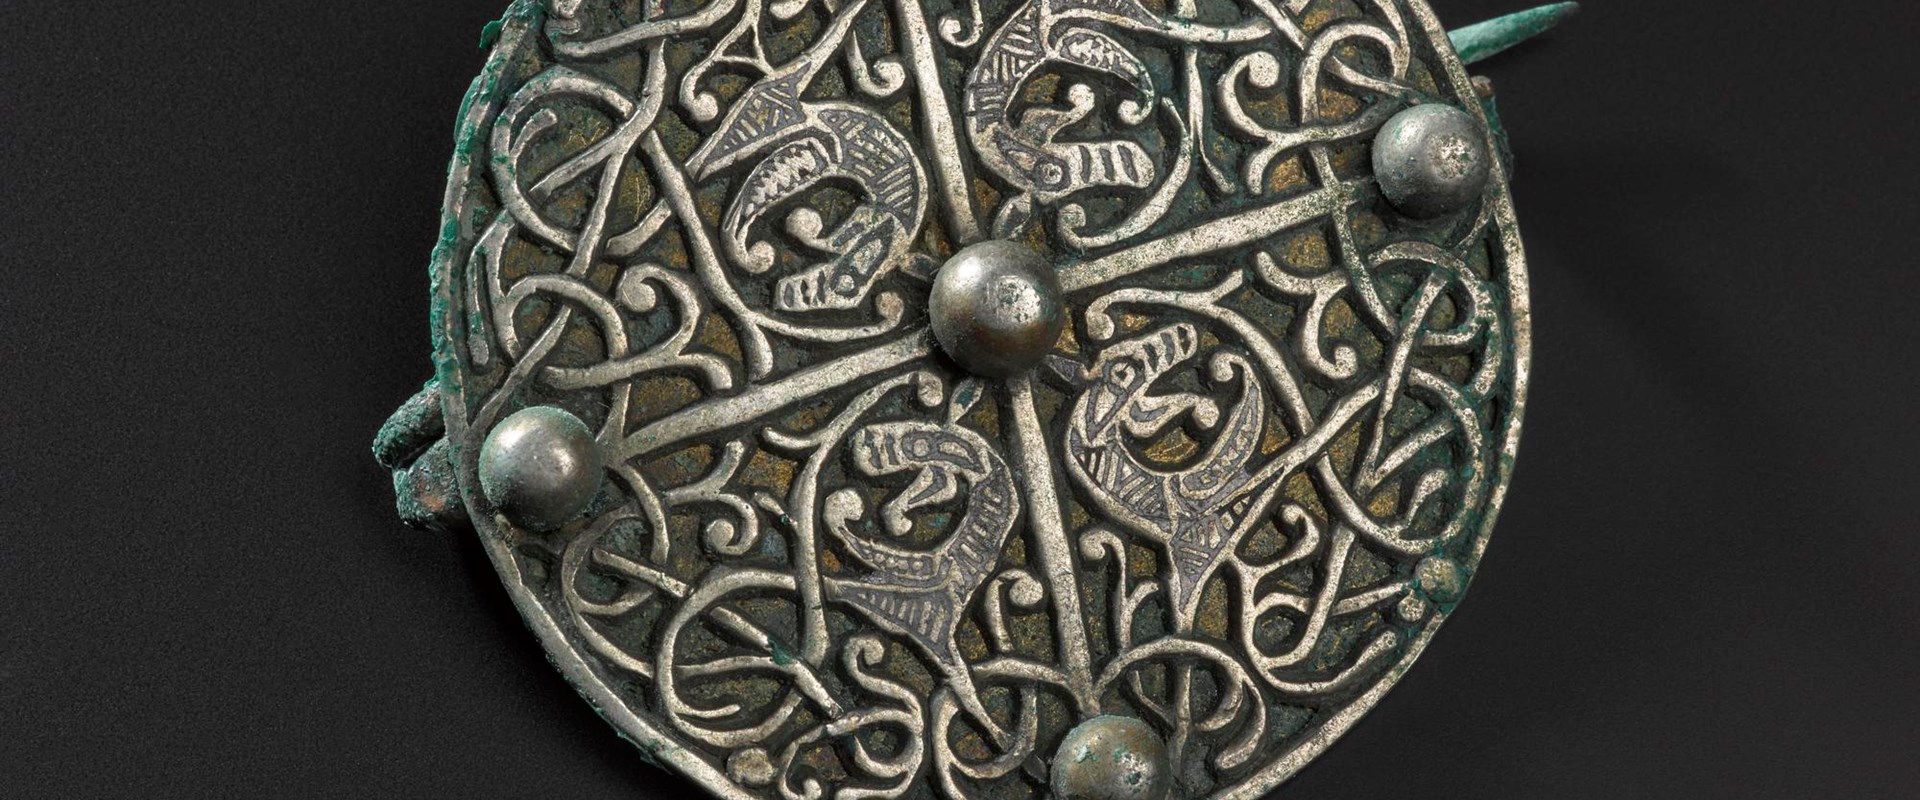 Circular metal brooch on a black background decorated with vine-like patterns and four mysterious beasts in the centre.